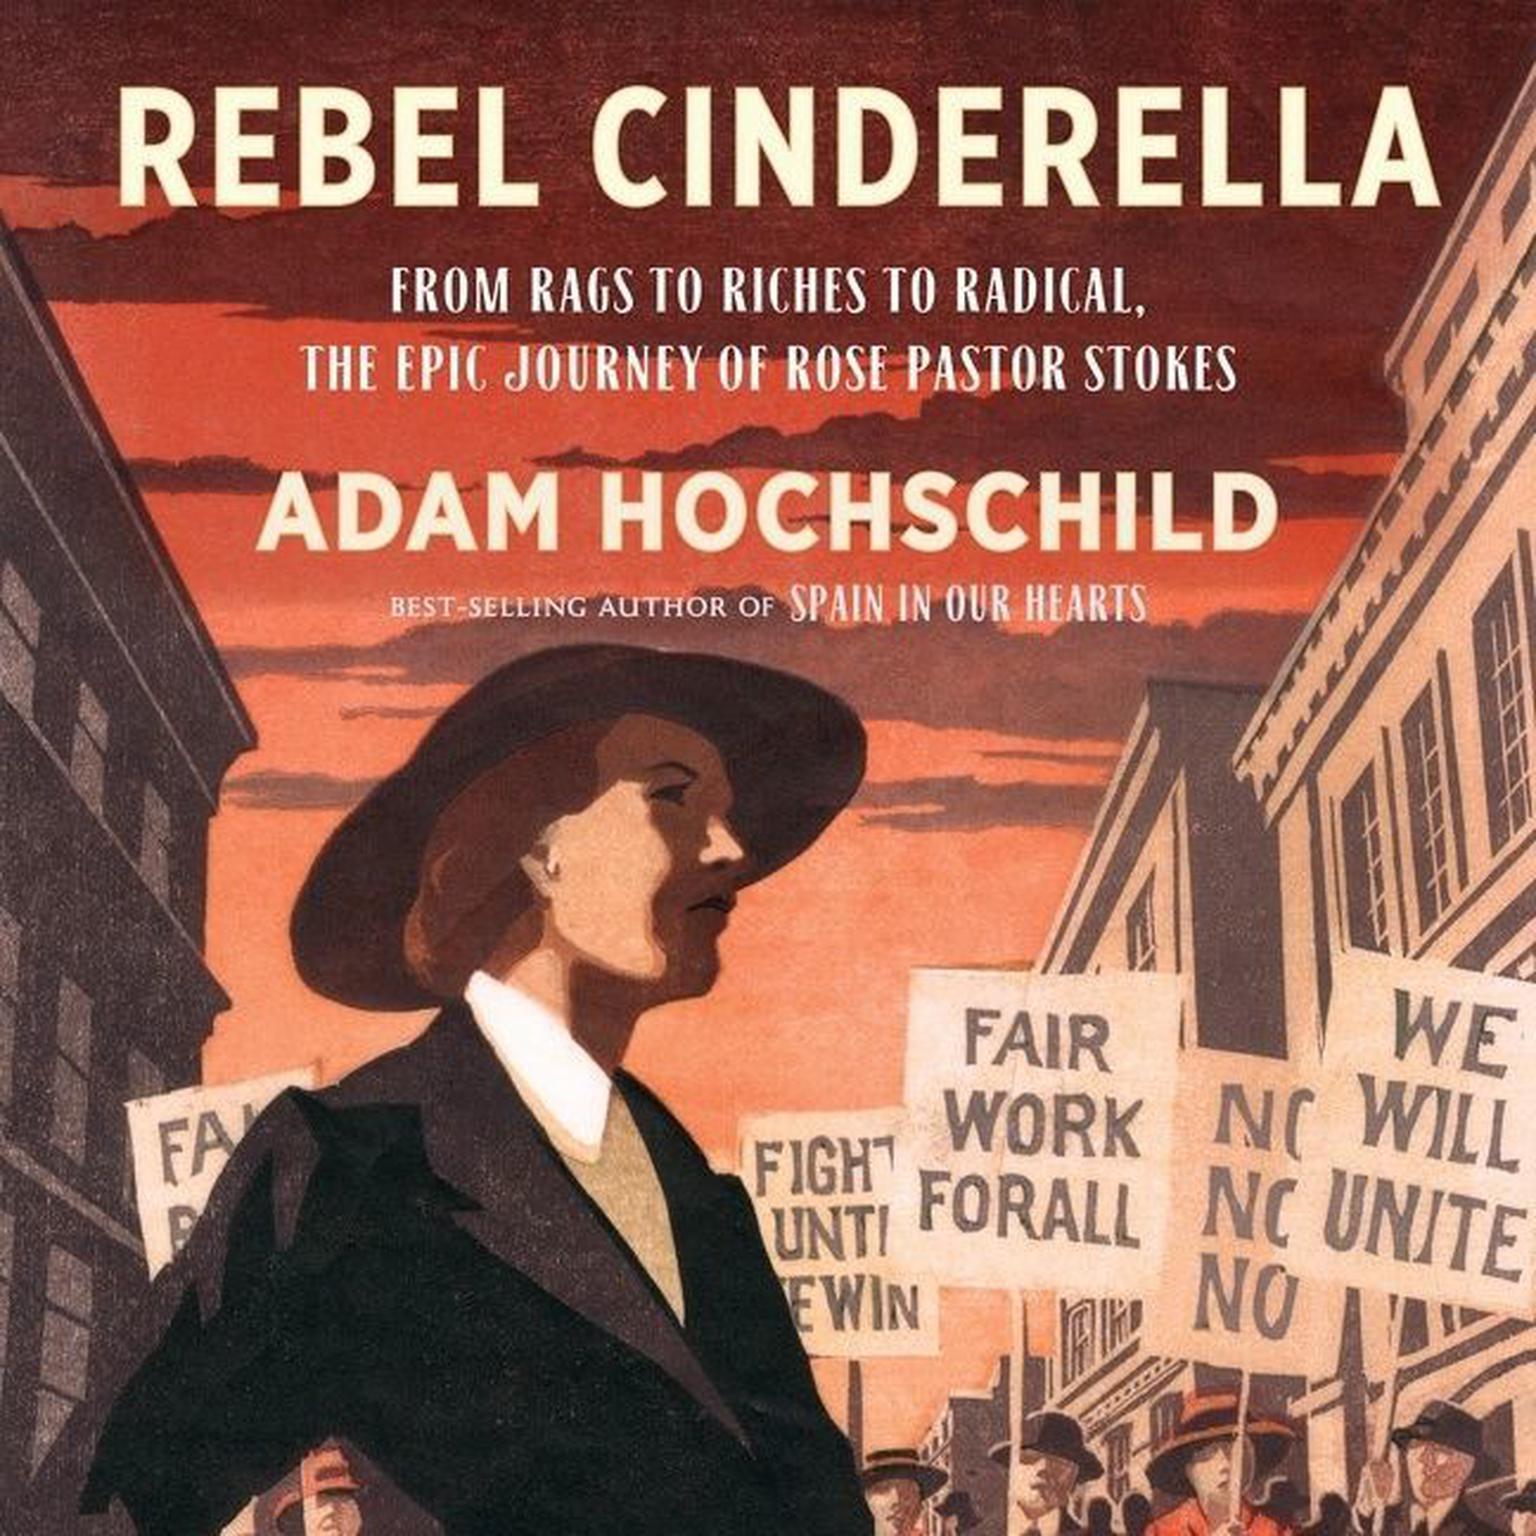 Rebel Cinderella: From Rags to Riches to Radical, the Epic Journey of Rose Pastor Stokes Audiobook, by Adam Hochschild